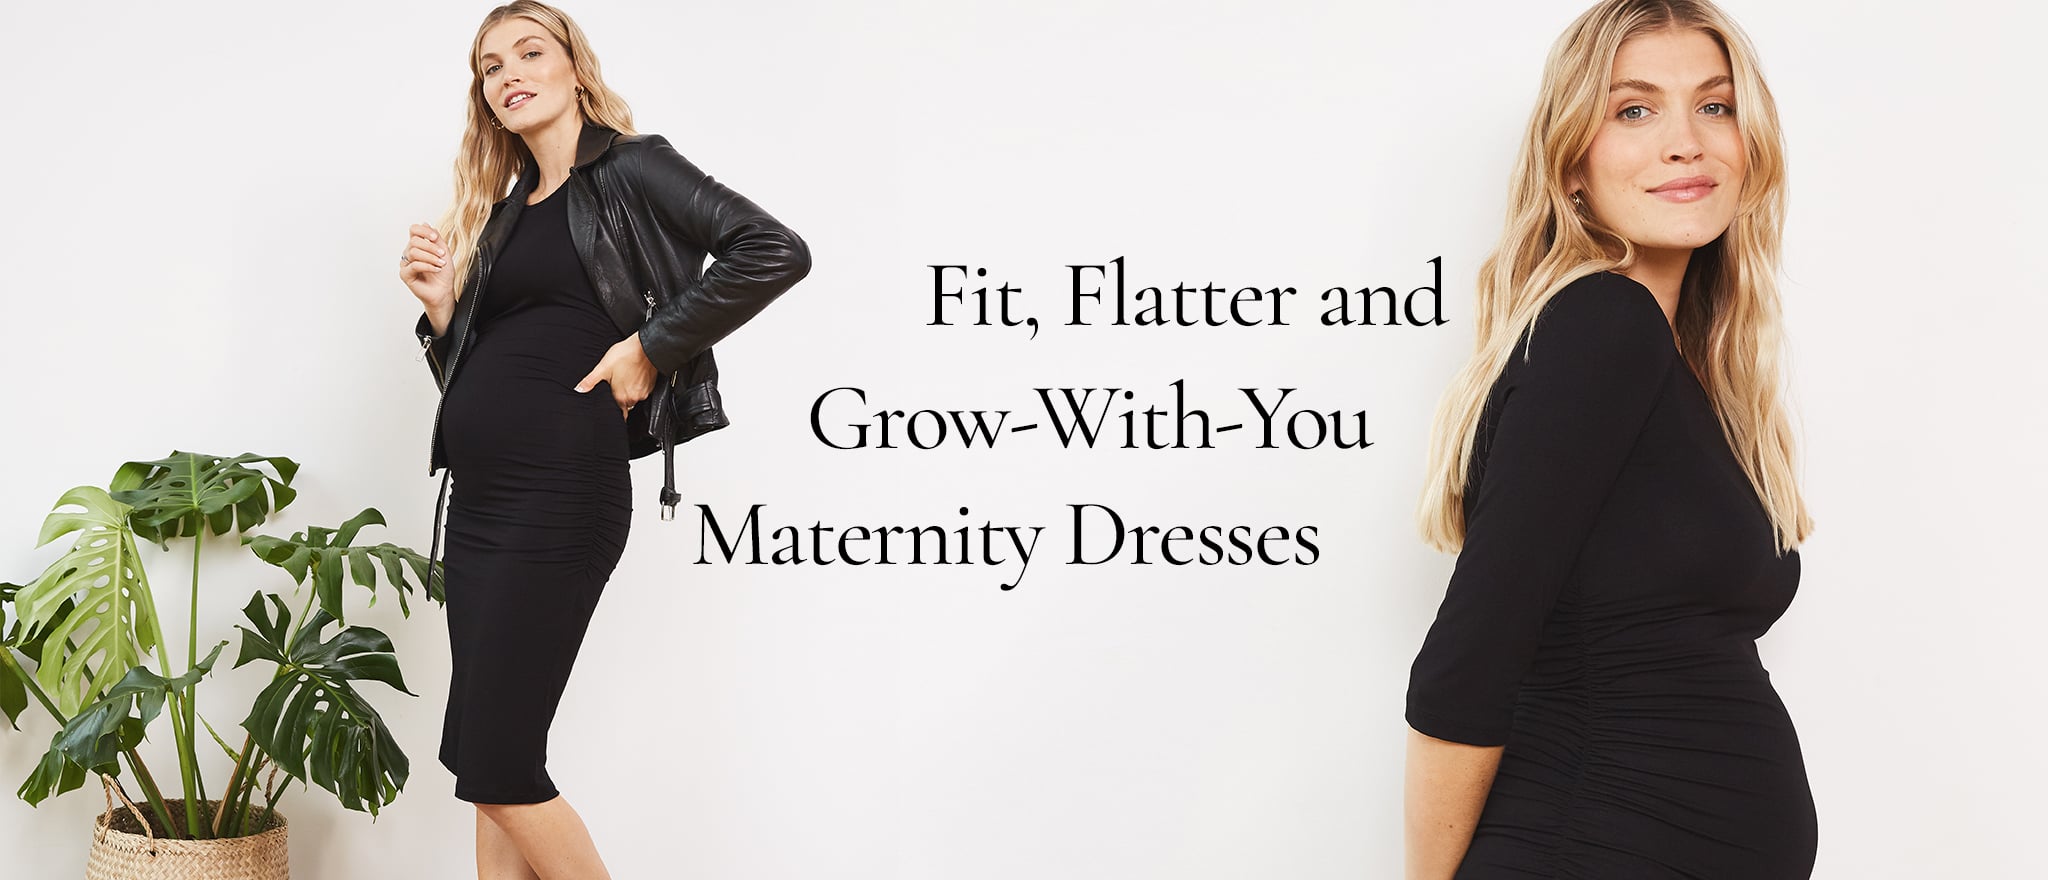 Fit, Flatter and Grow-With-You Maternity Dresses